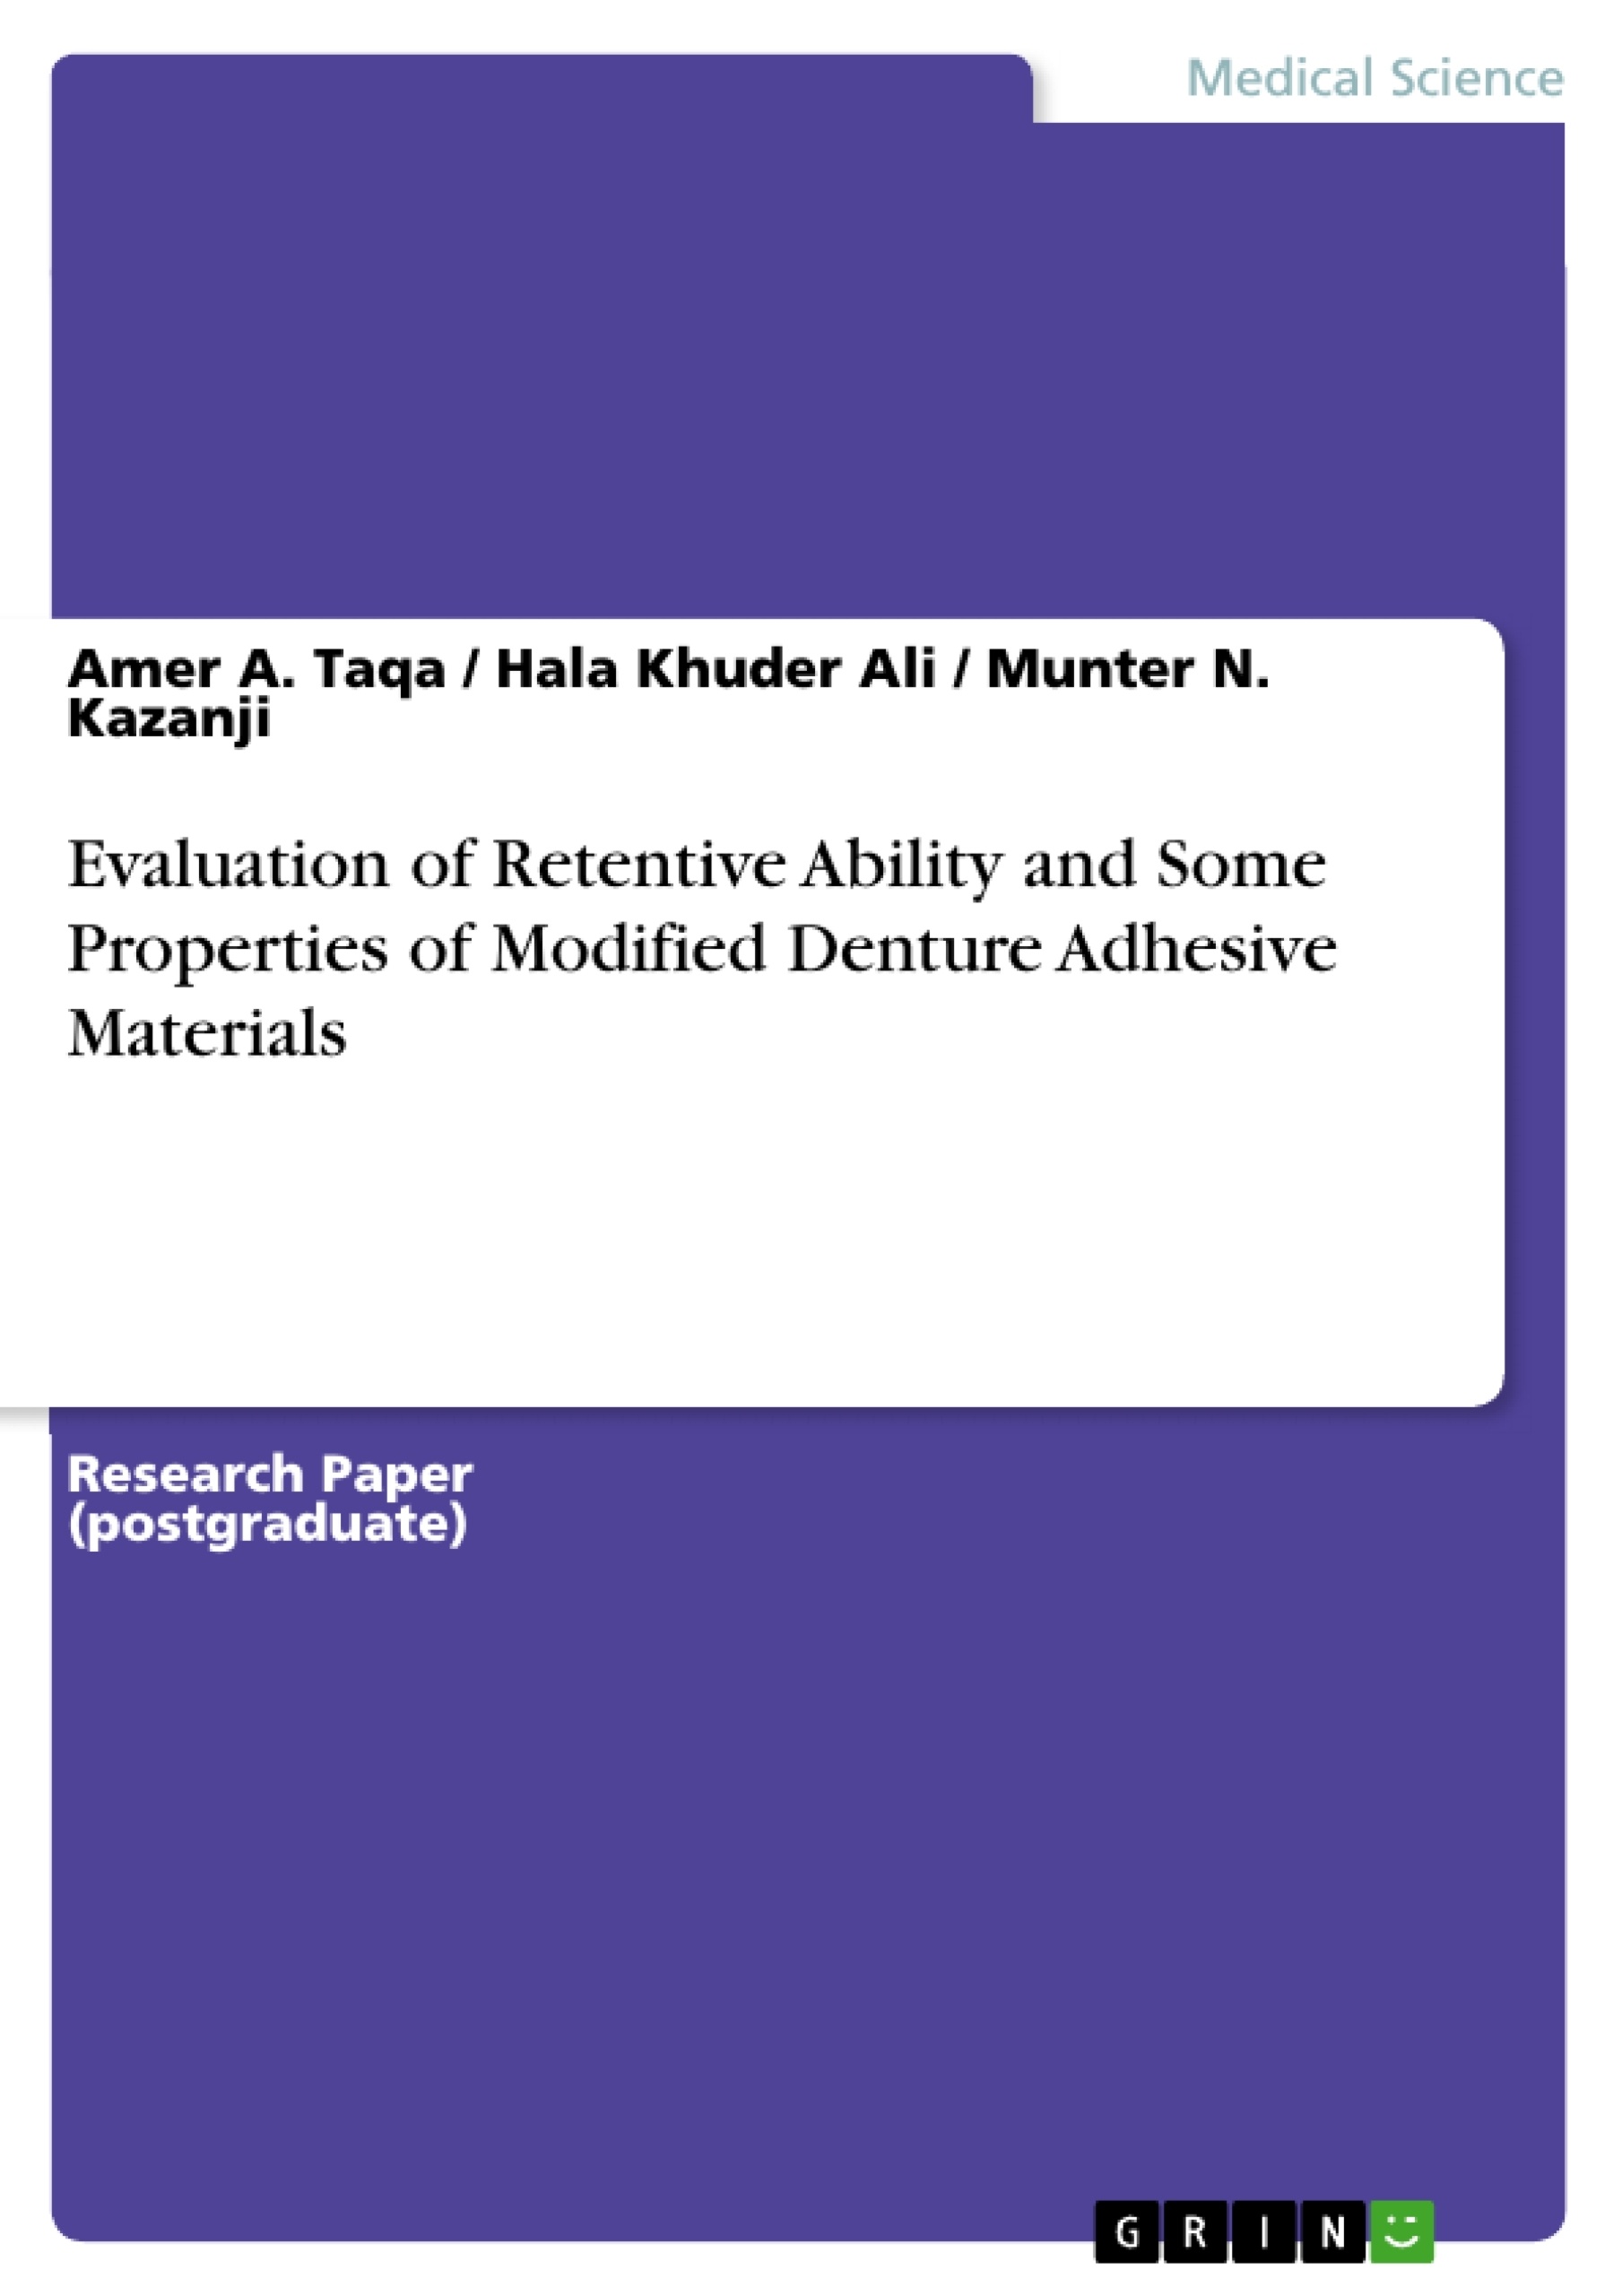 Title: Evaluation of Retentive Ability and Some Properties of Modified Denture Adhesive Materials